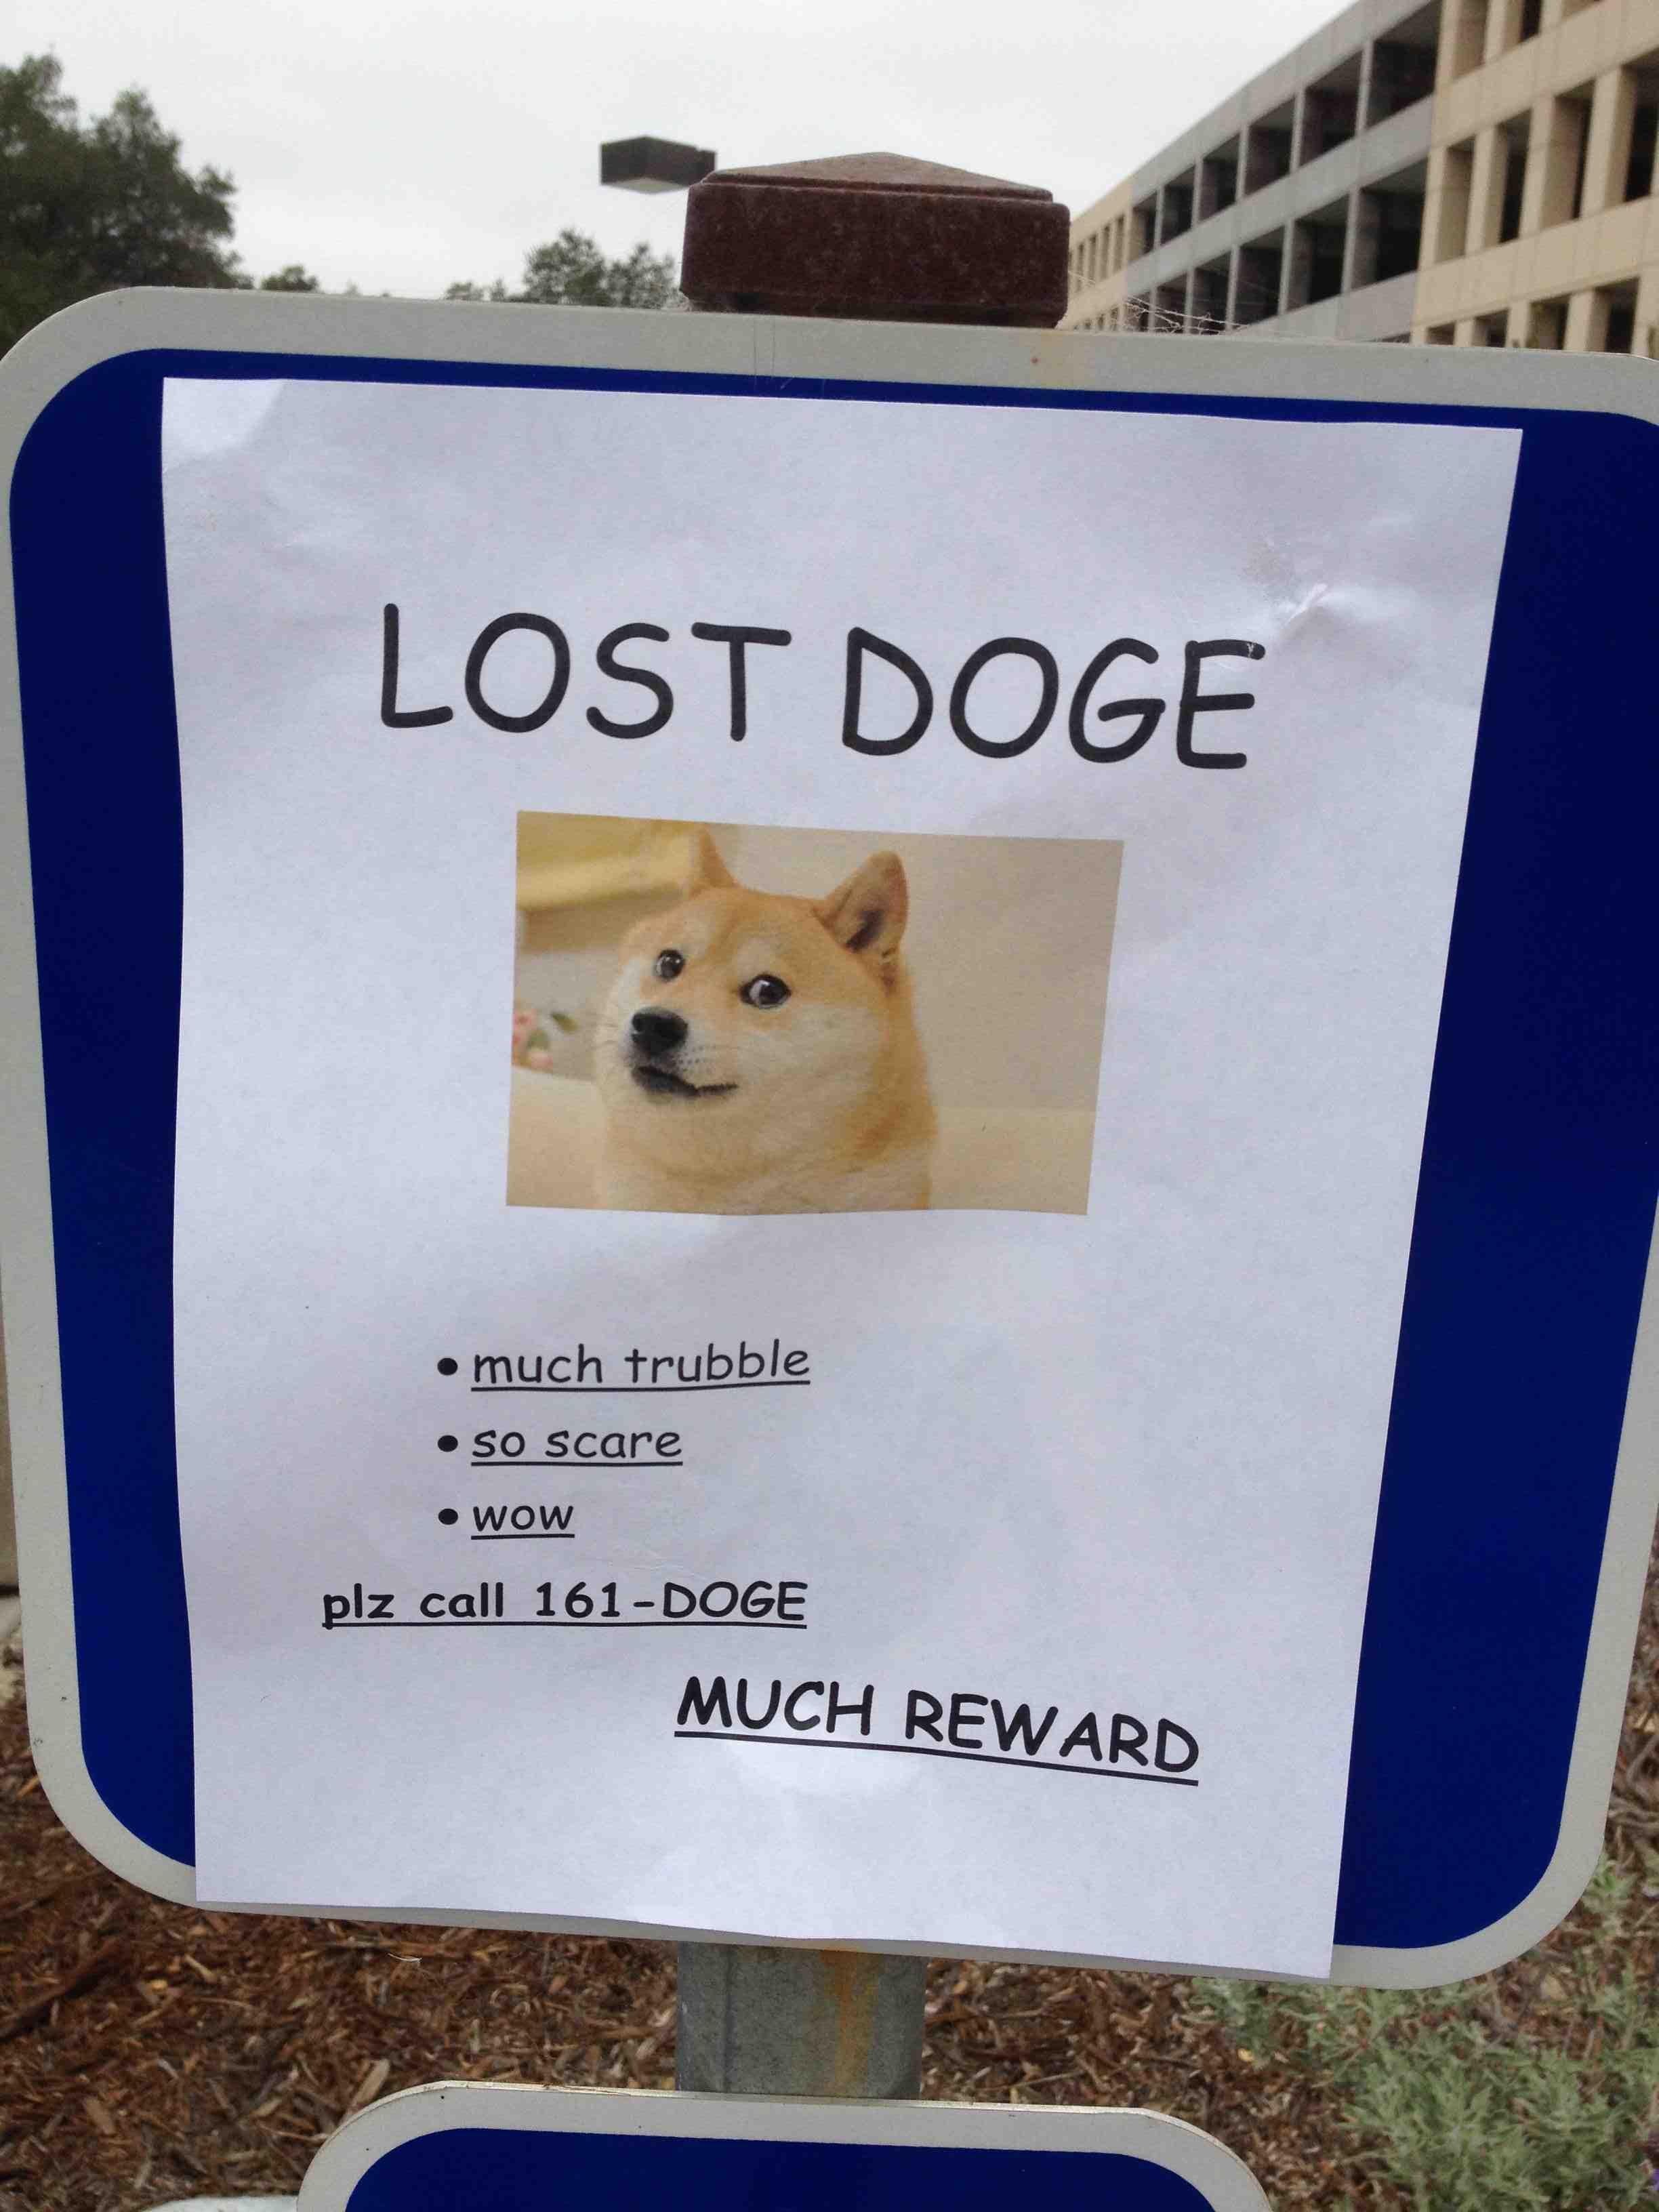 Lost Doge Meme ! Much Trouble, So Scare, Wow